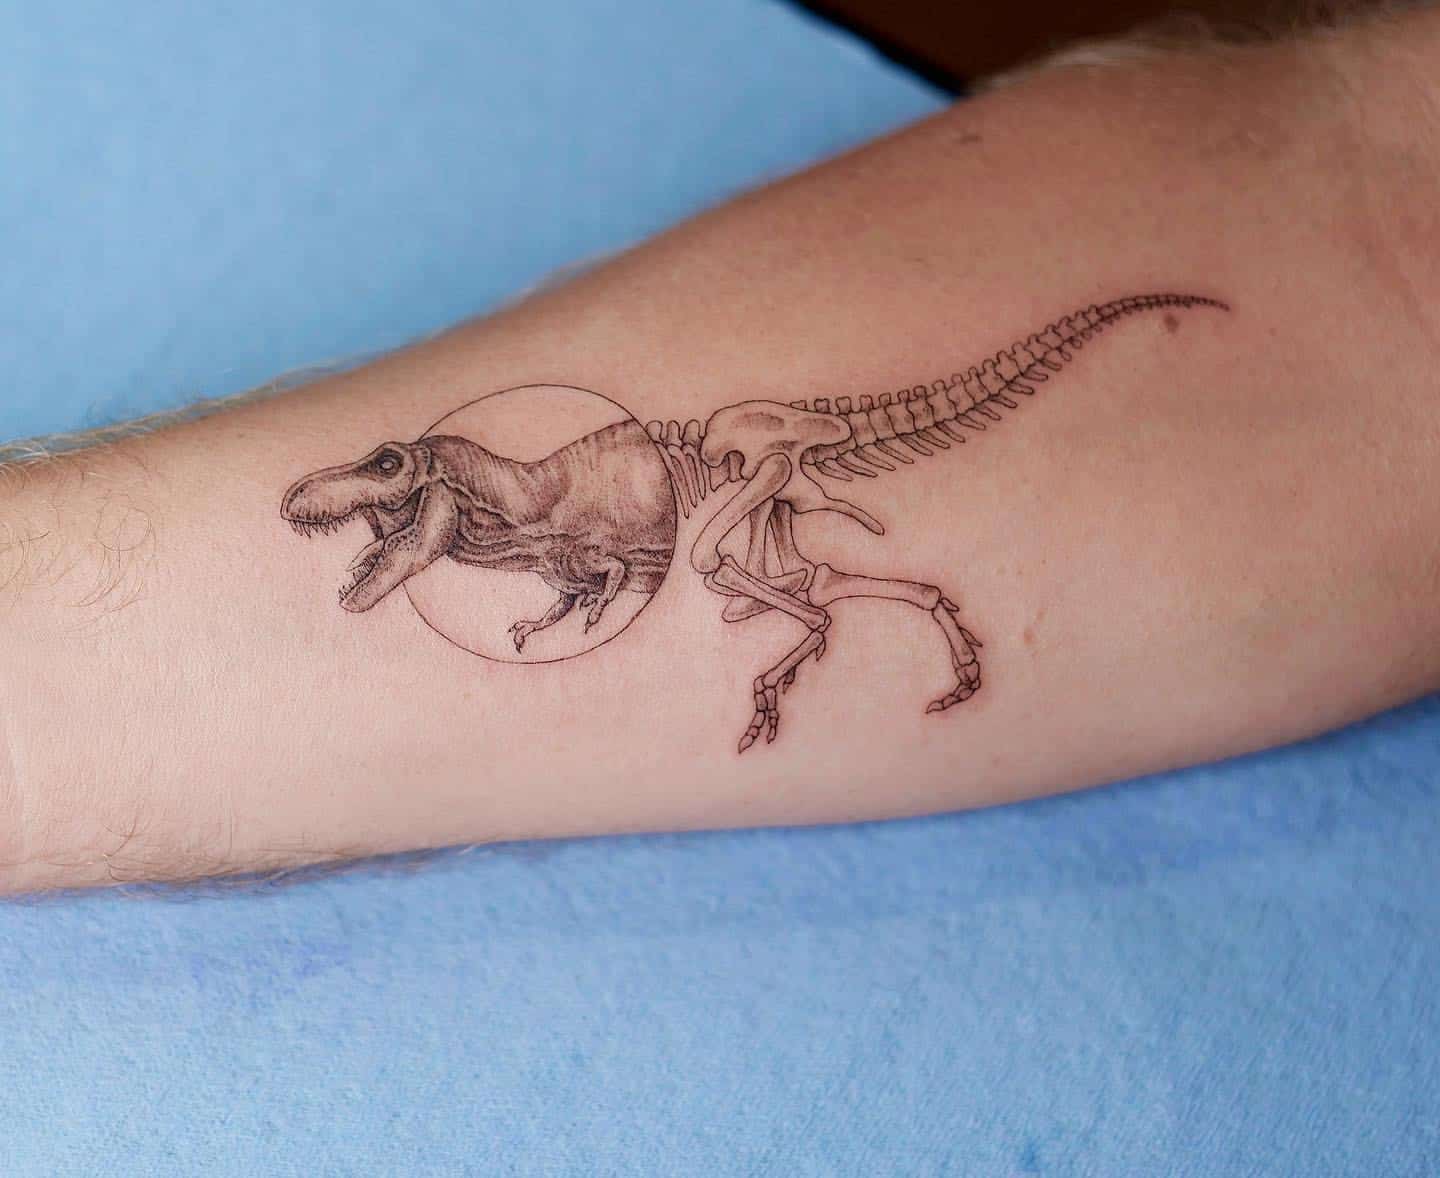 Share more than 75 raptor tattoo small best  thtantai2